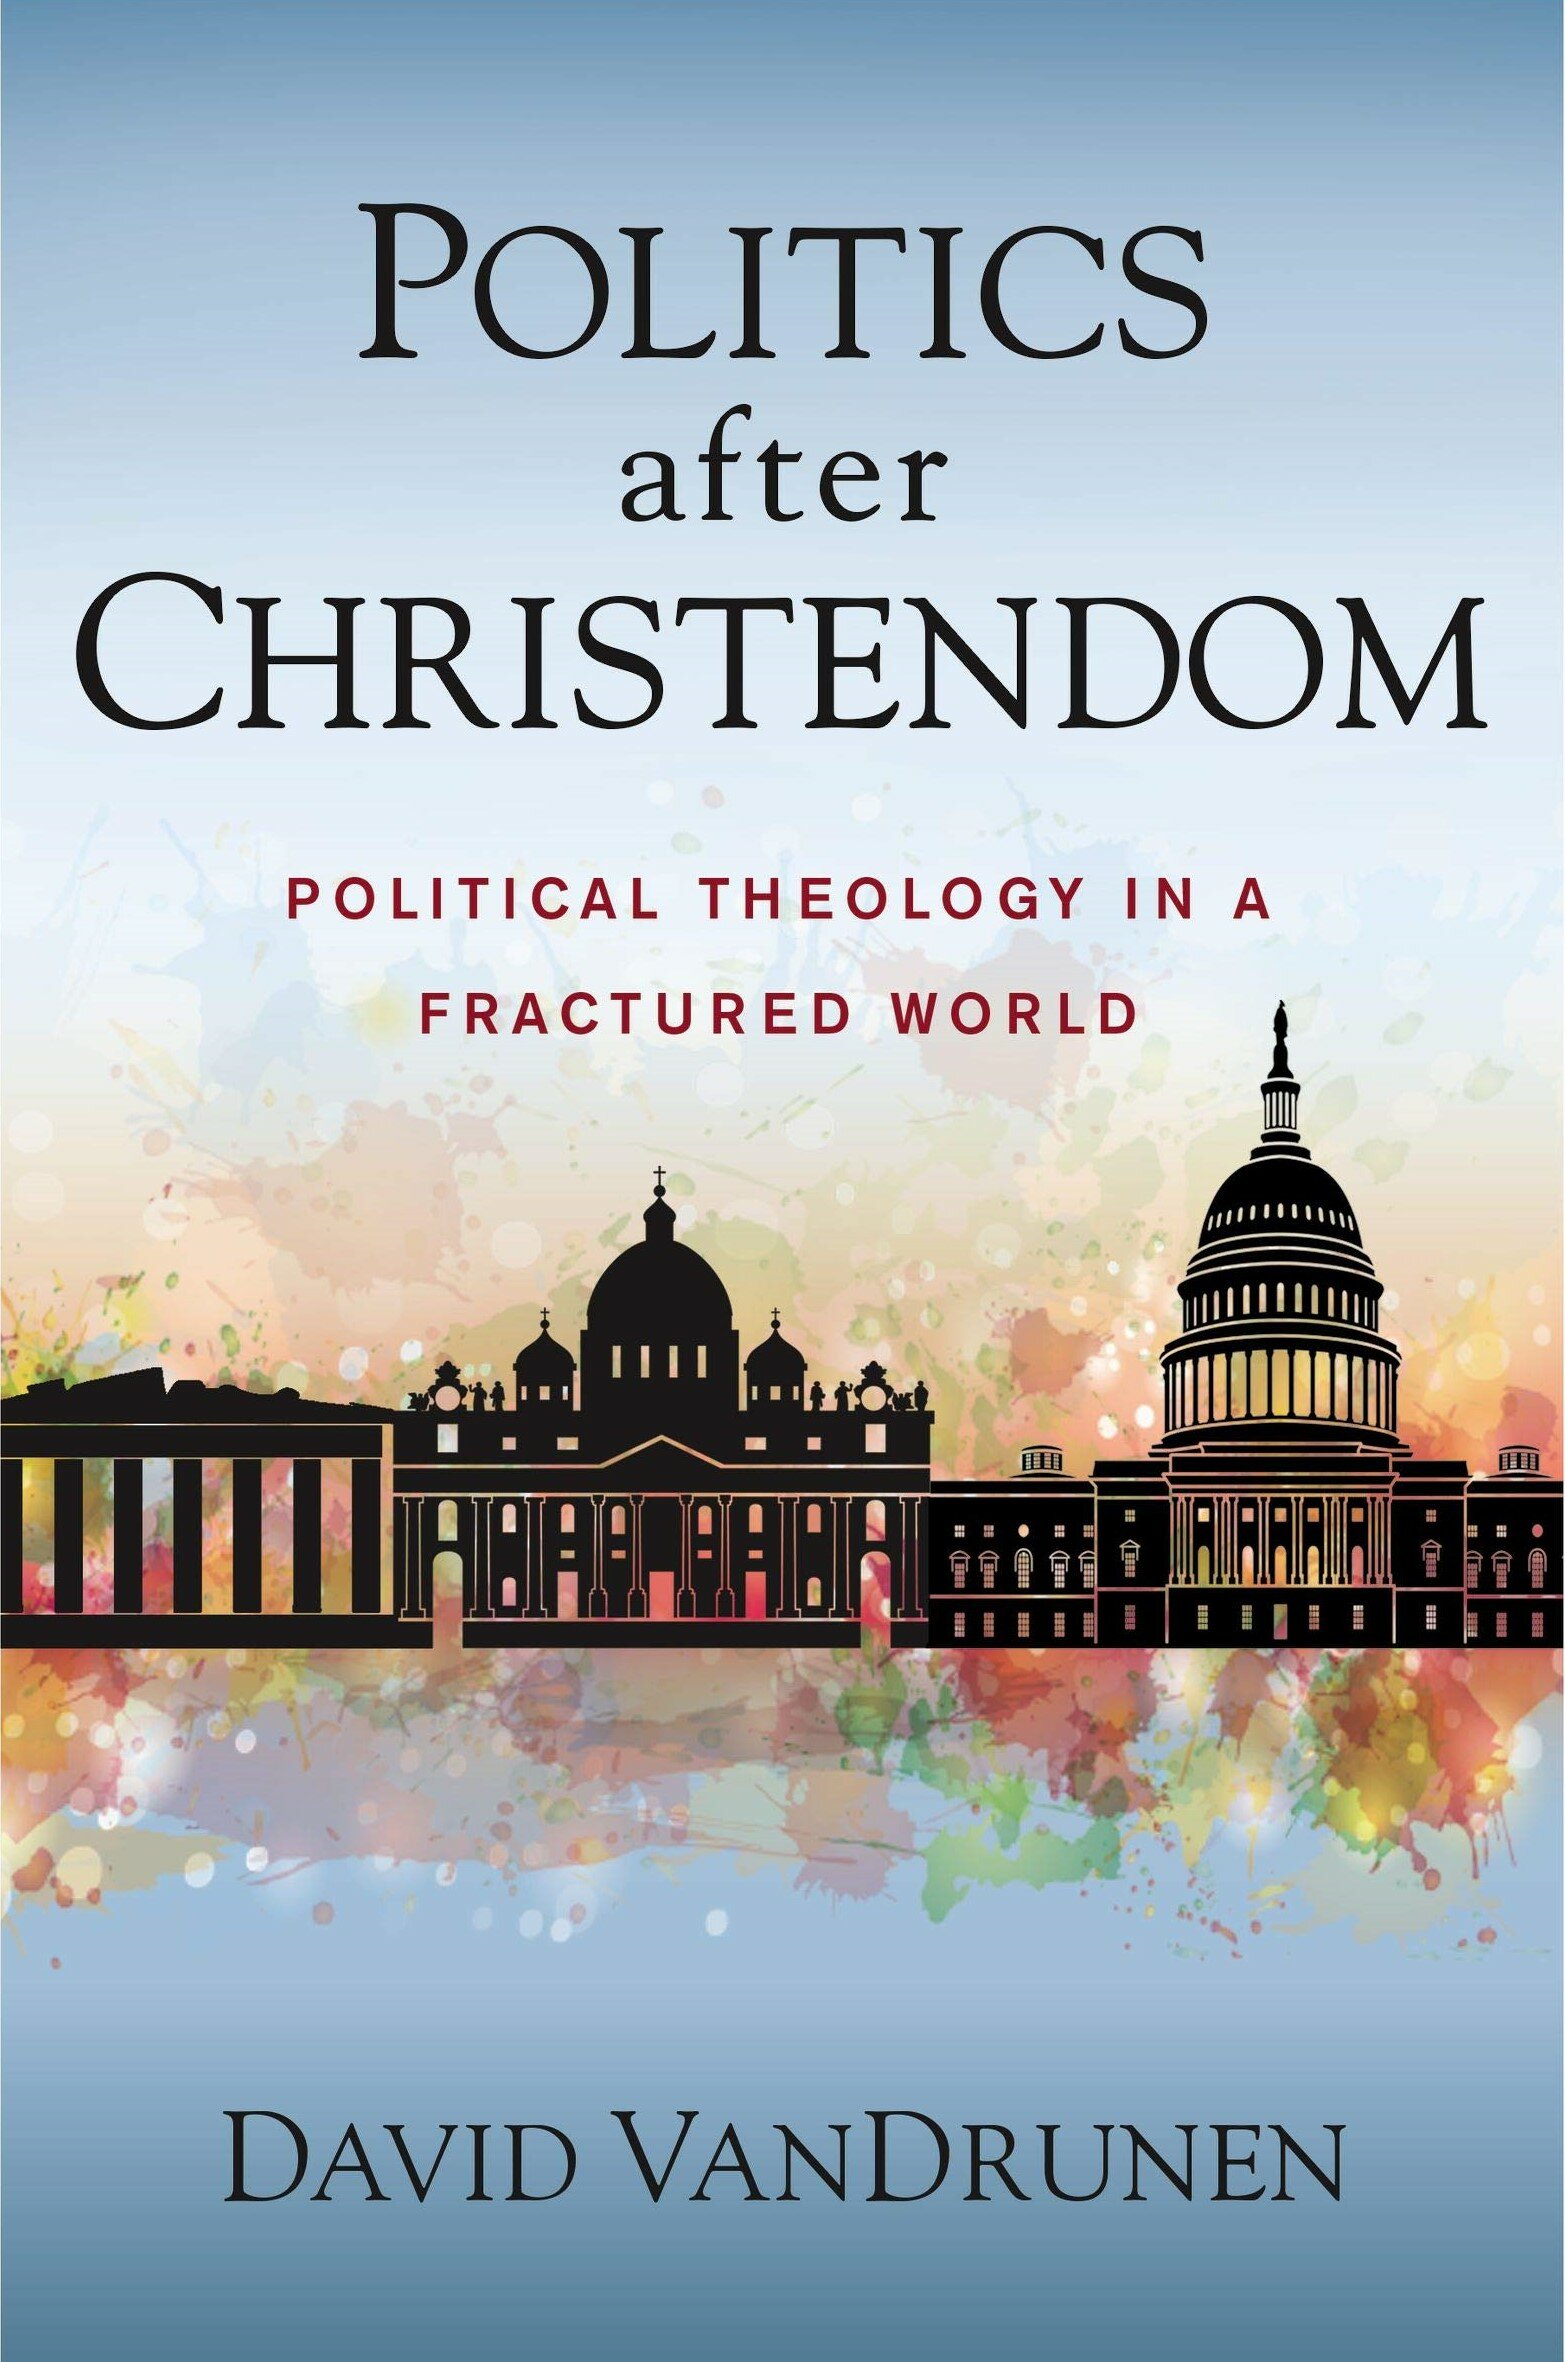 Politics after Christendom: Political Theology in a Fractured World